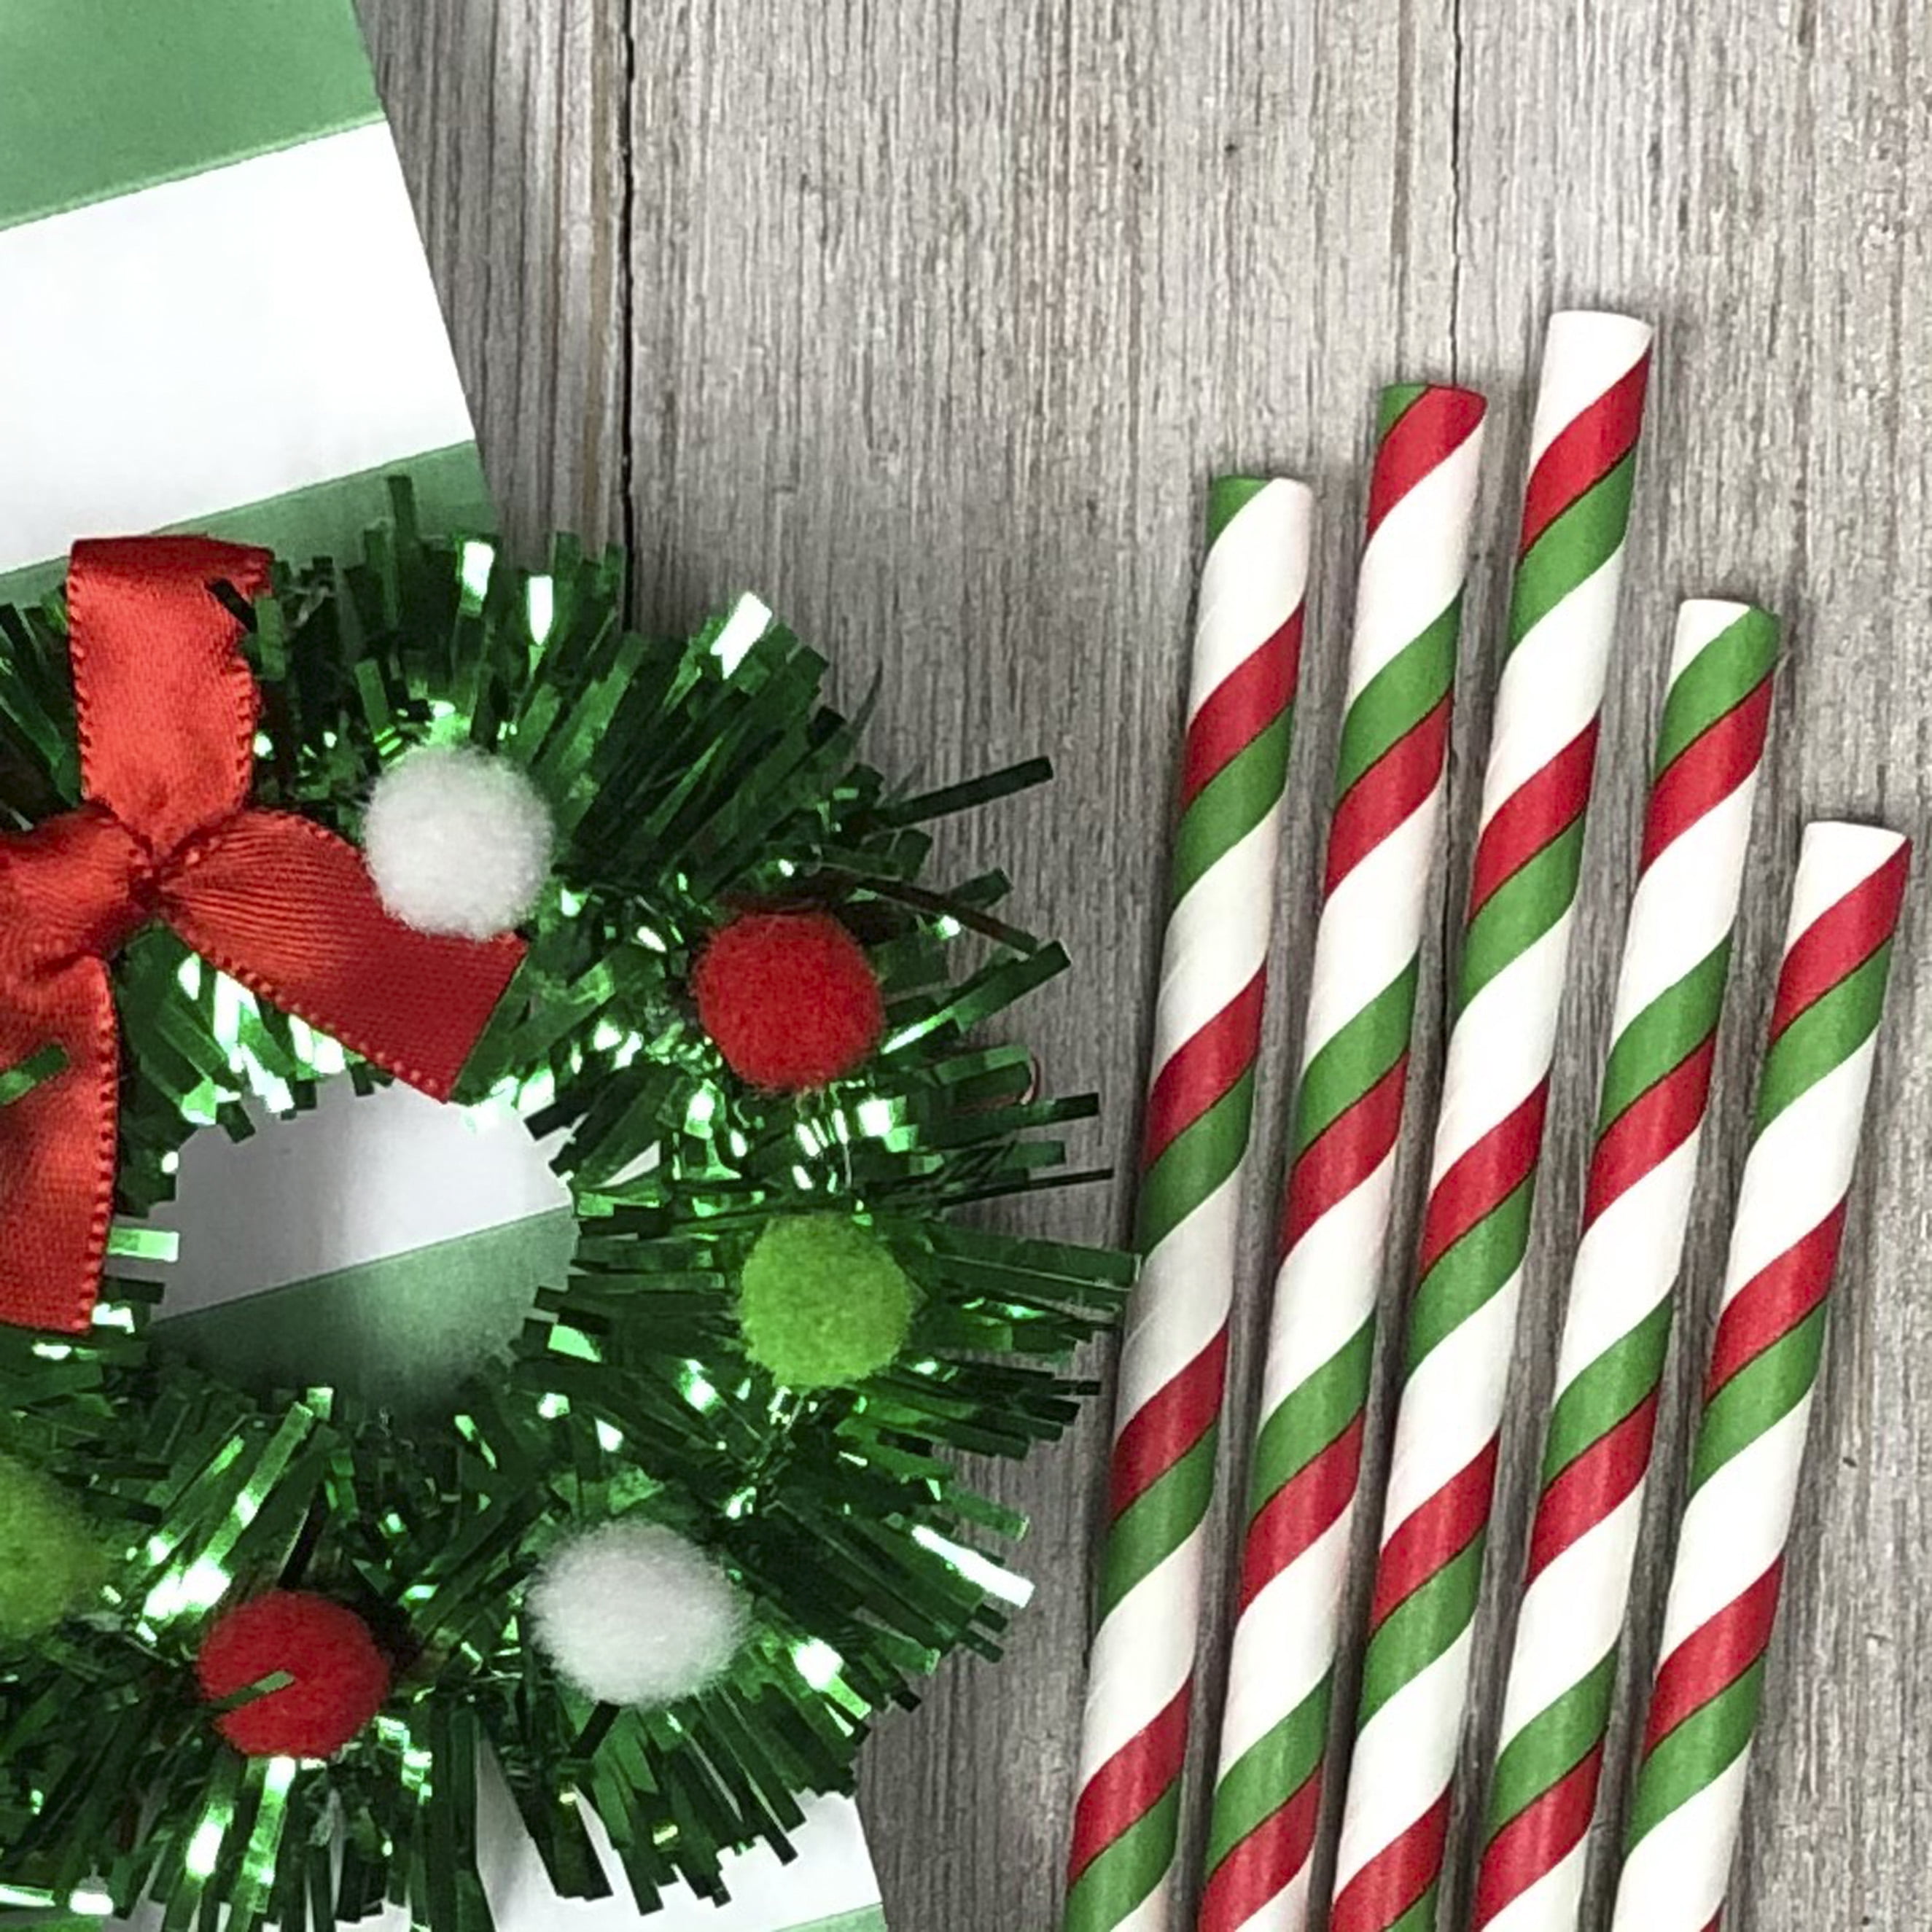 Cheers.US 225Pcs/Set Christmas Paper Straws Drinking Straws Colorful Stripe  Paper Straw, Xmas Straws - Assorted Holiday Themed Red and Green Paper  Christmas Straws - Biodegradable and Disposable 